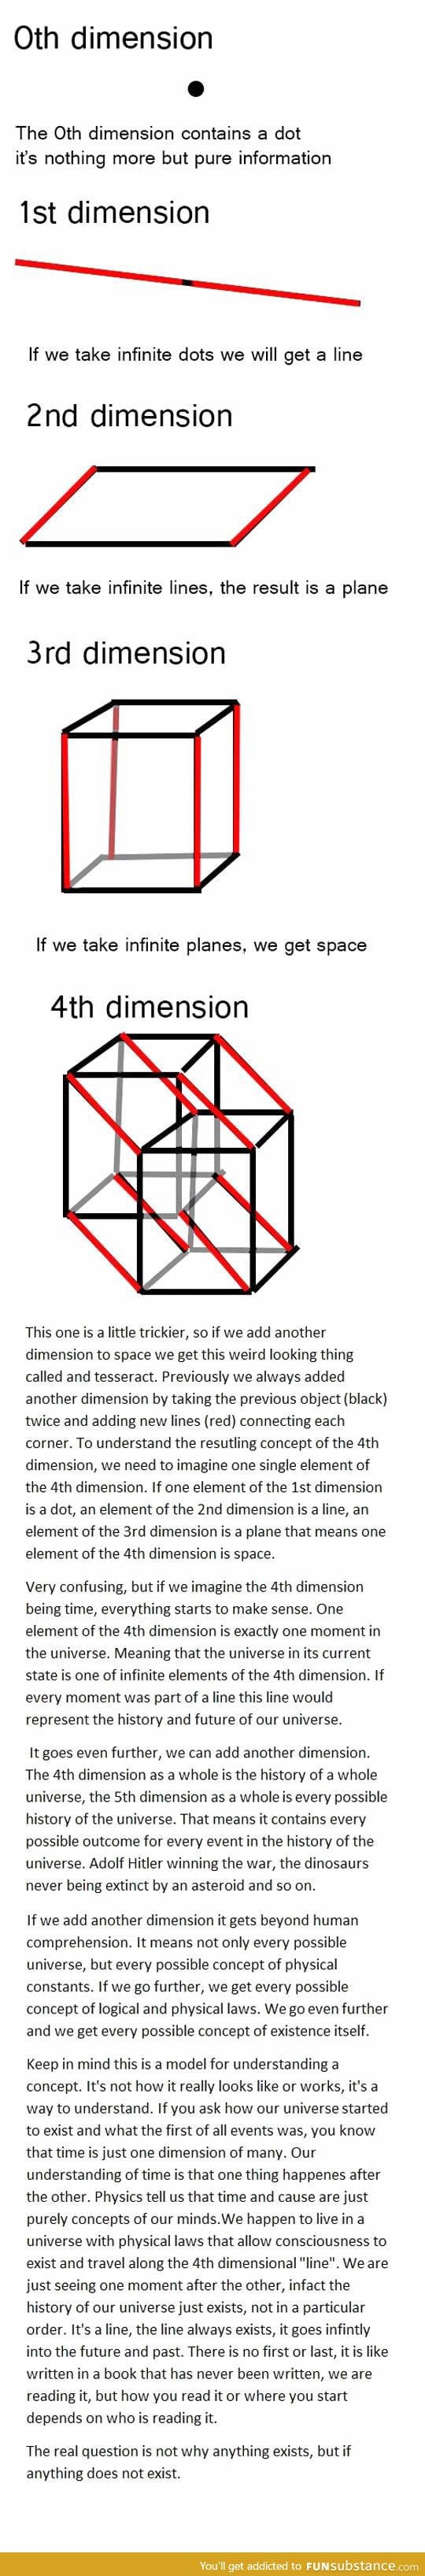 The thing about dimensions